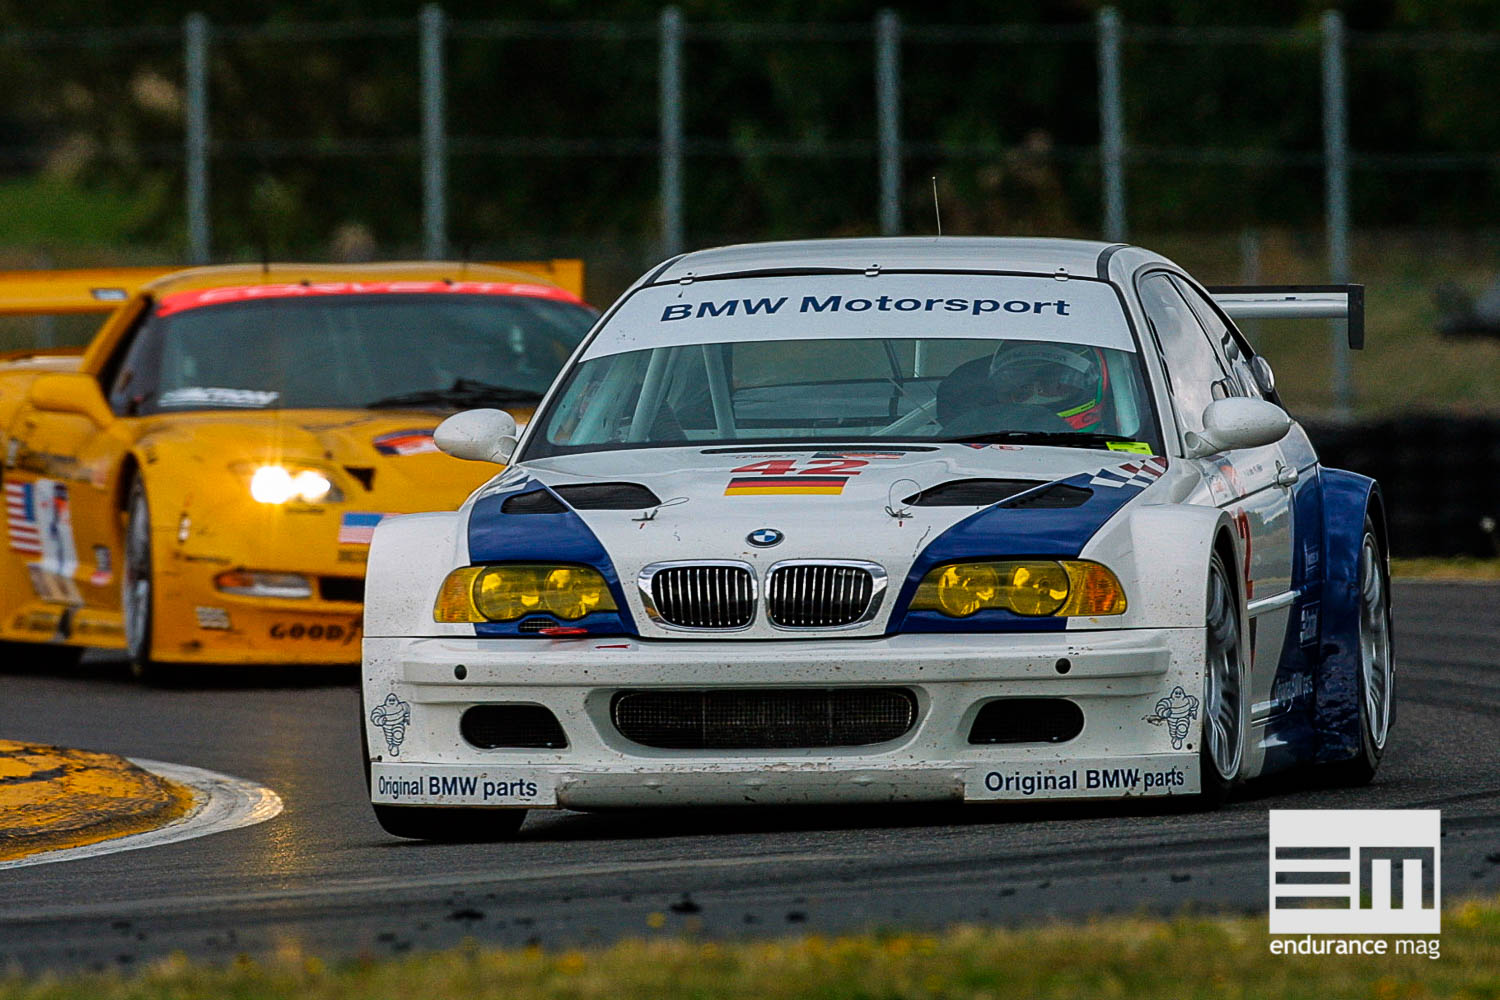 Jorg Muller (GER) in the BMW M3 GTR # 42 races in front during the ALMS race in Portland, Oregon, USA. Muller is teamed with J.J. Letho (FIN).